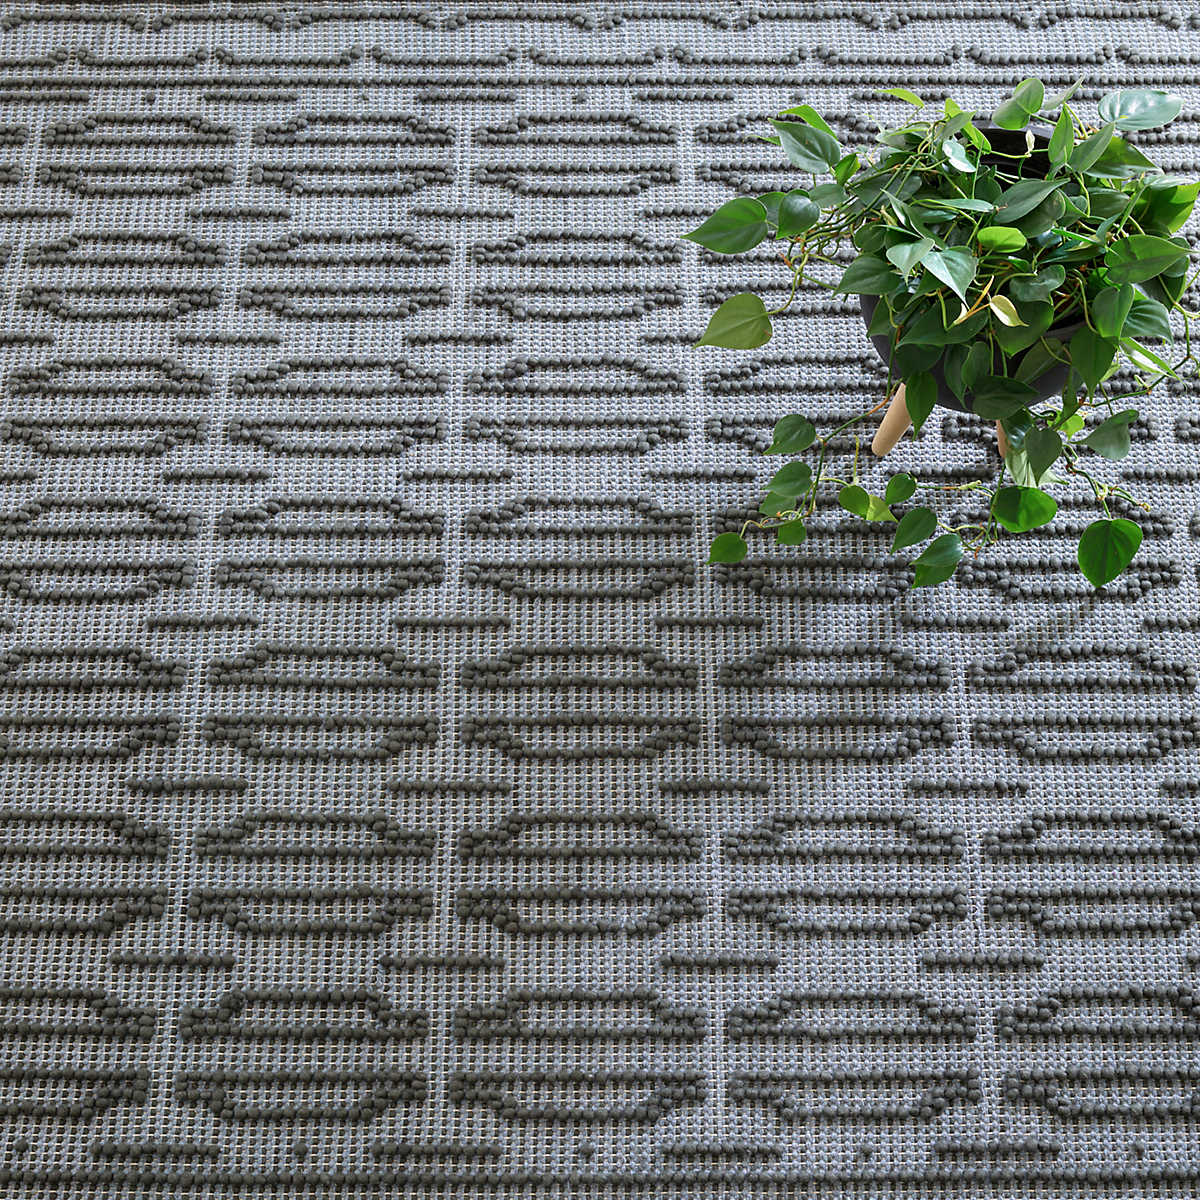 The Campbell Iron Rug relief pattern plays across a gently marled woven wool ground, accentuating the graphic dimension created by the different weaves. The central motif is repeated inversely to create a border around this sumptuous rug. Amethyst Home provides interior design services, furniture, rugs, and lighting in the Miami metro area.